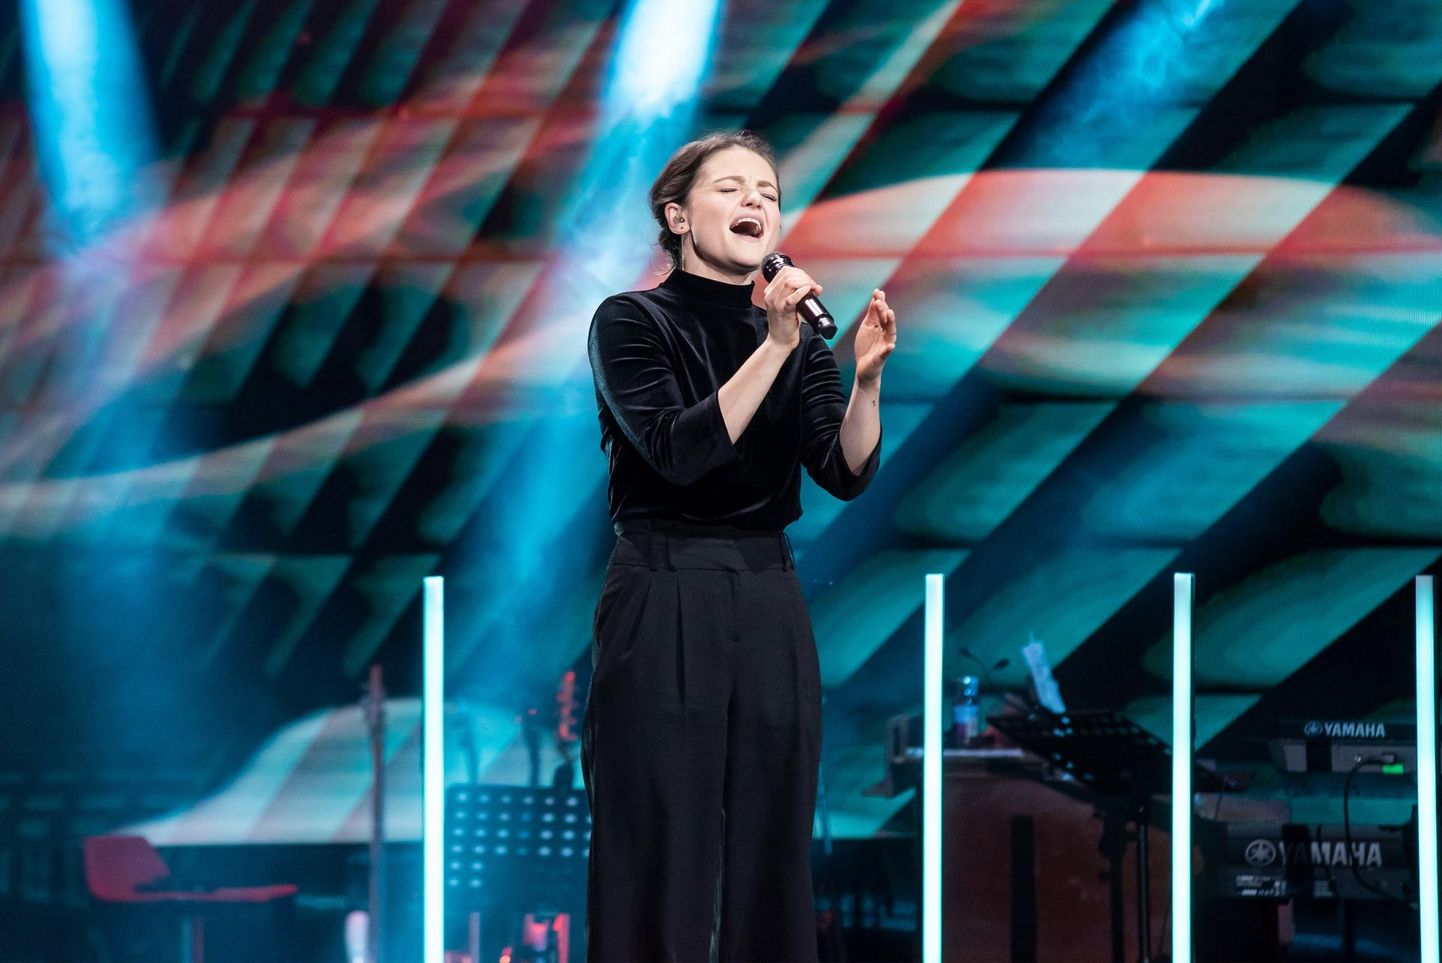 Siret Tuula Soome talendisaate “The Voice of Finland 2021” laval.